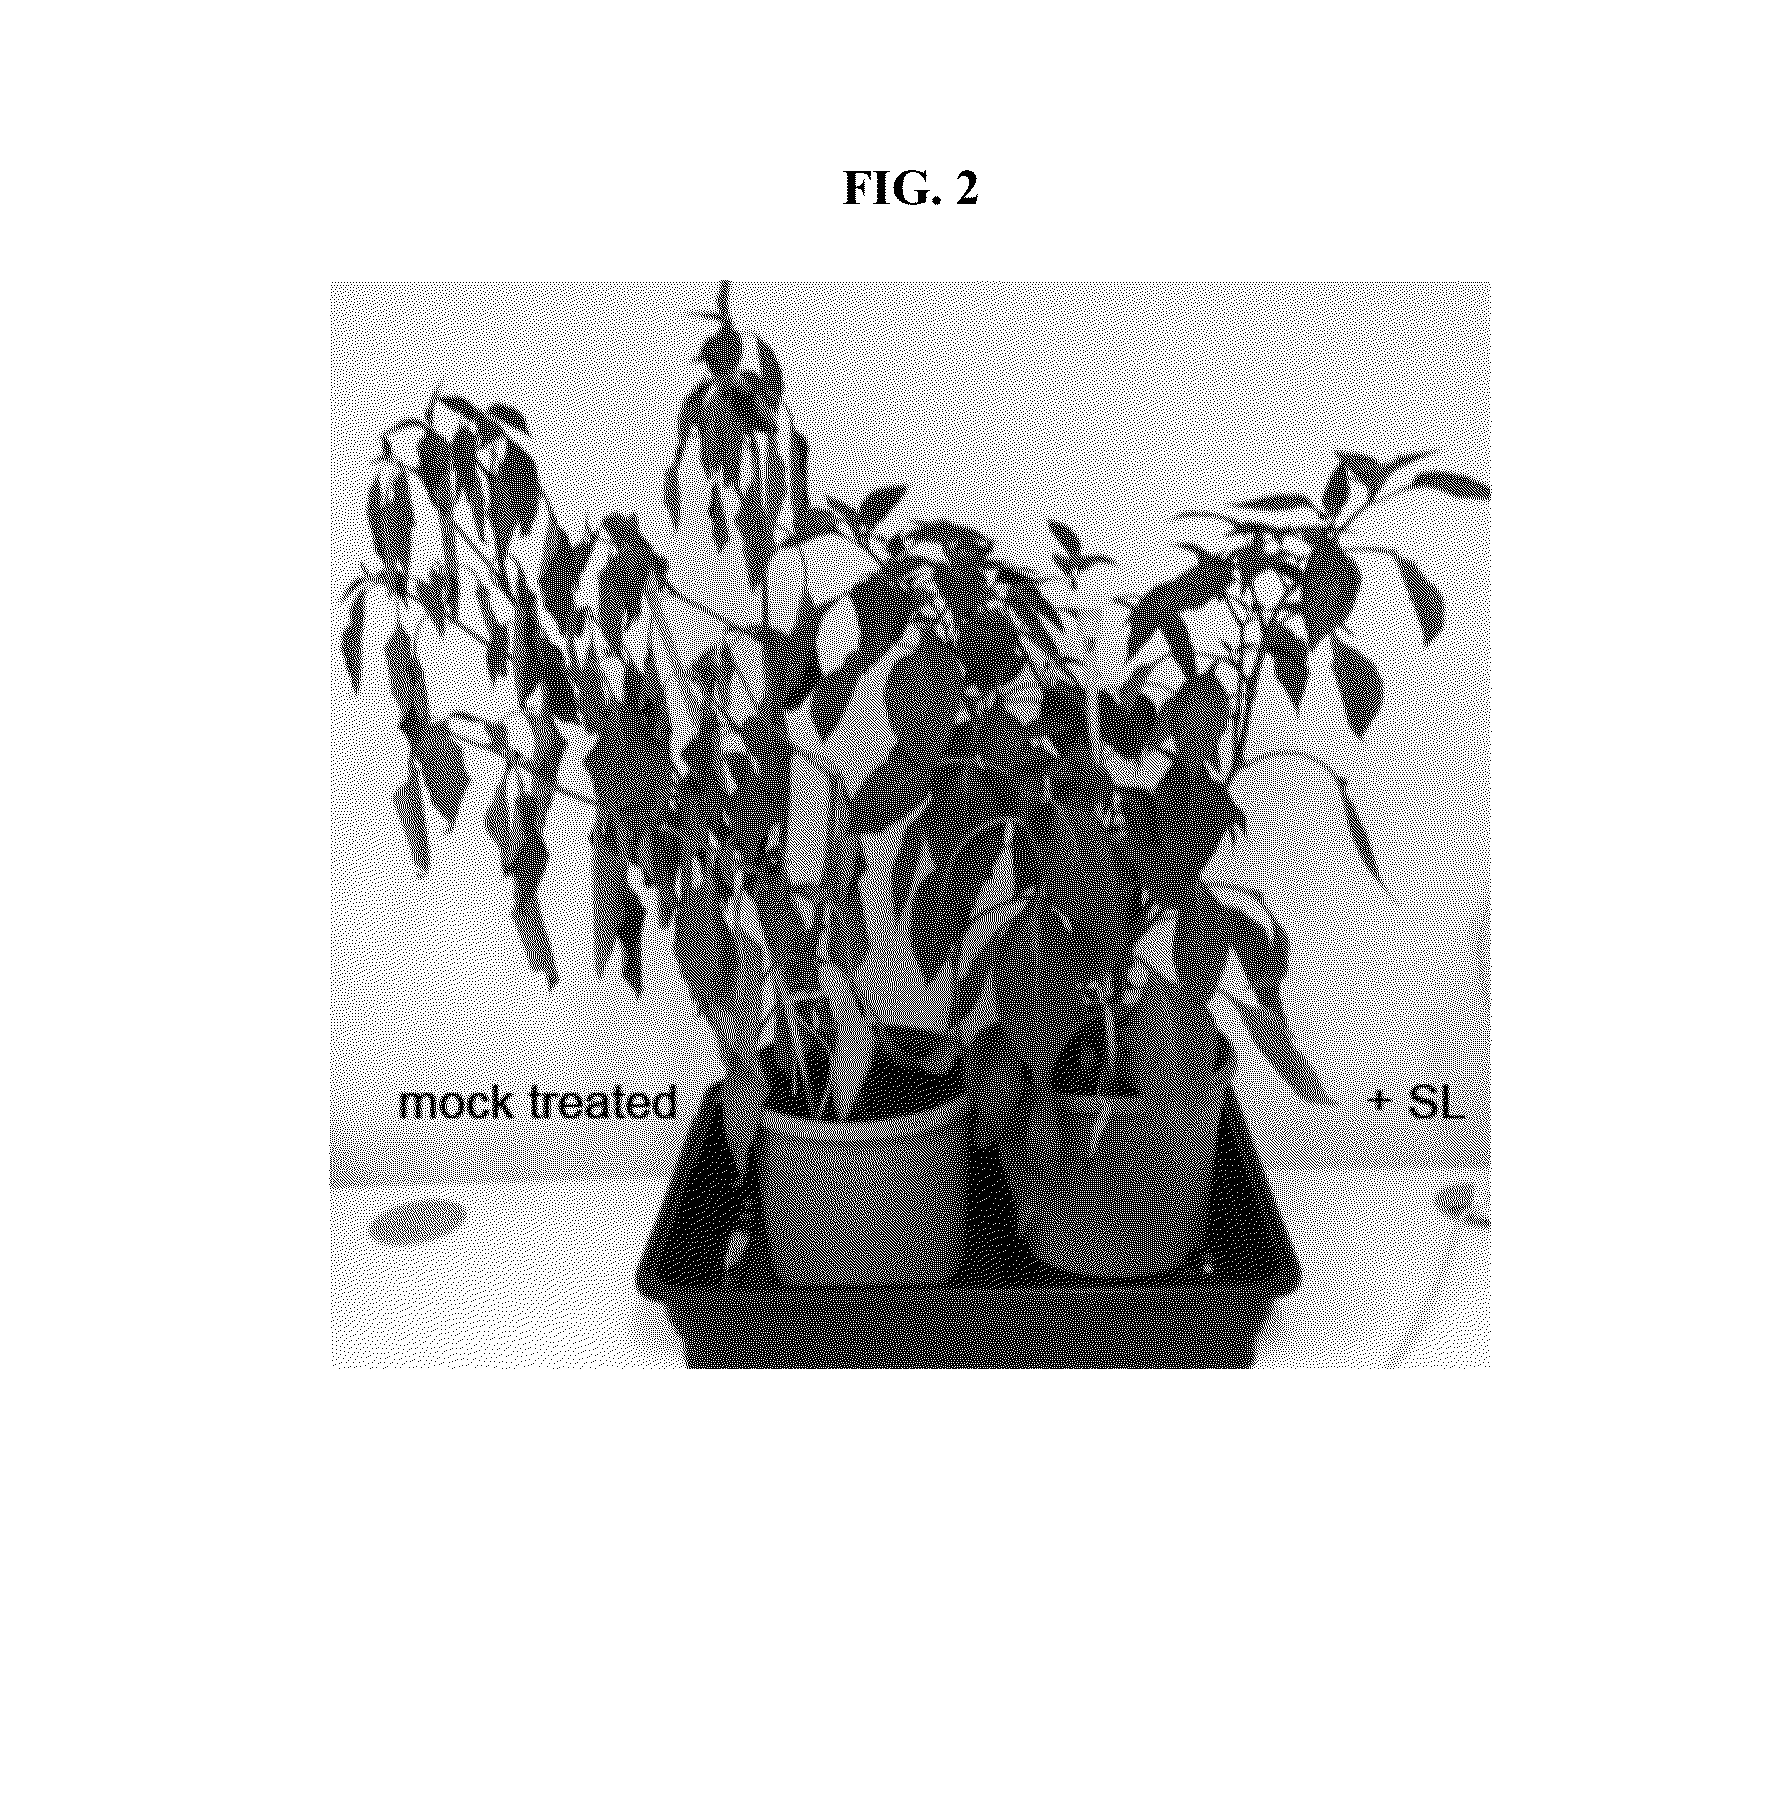 Strigolactone Compositions And Uses Thereof